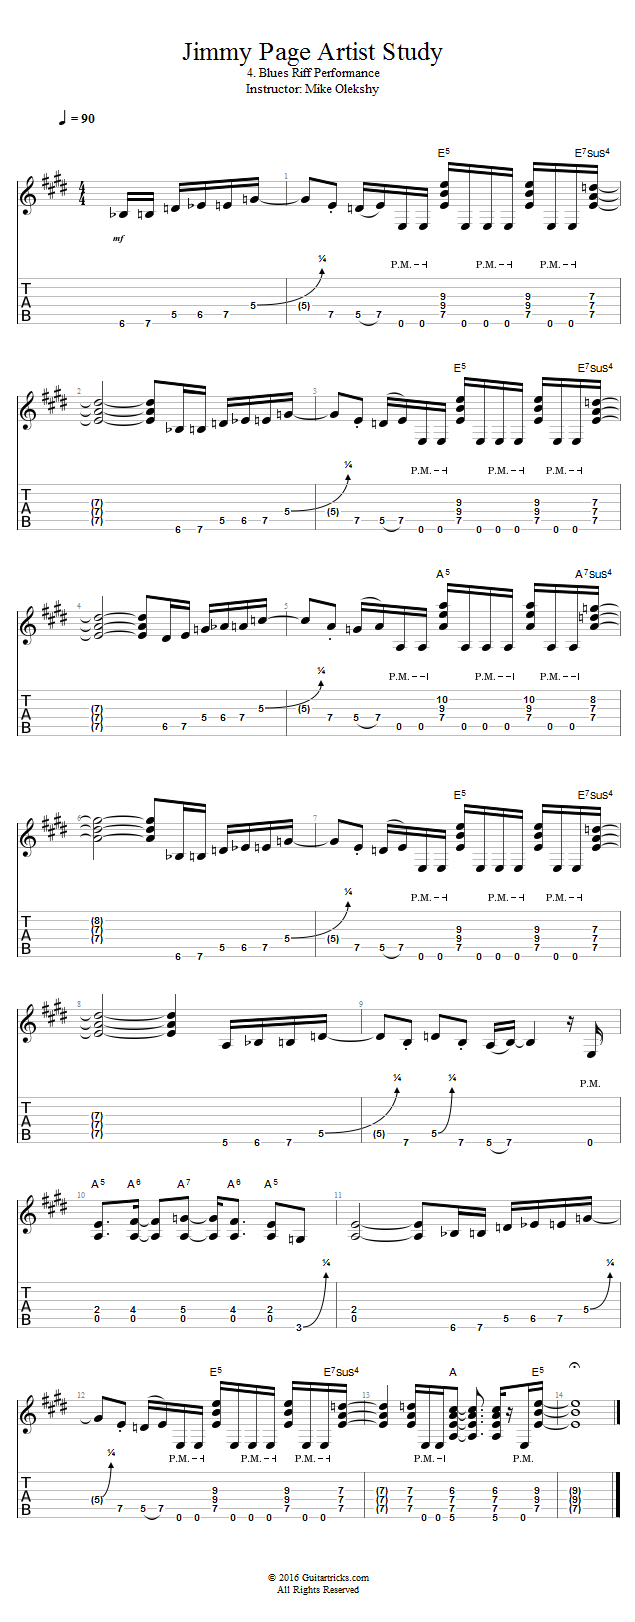 Blues Riff Performance song notation